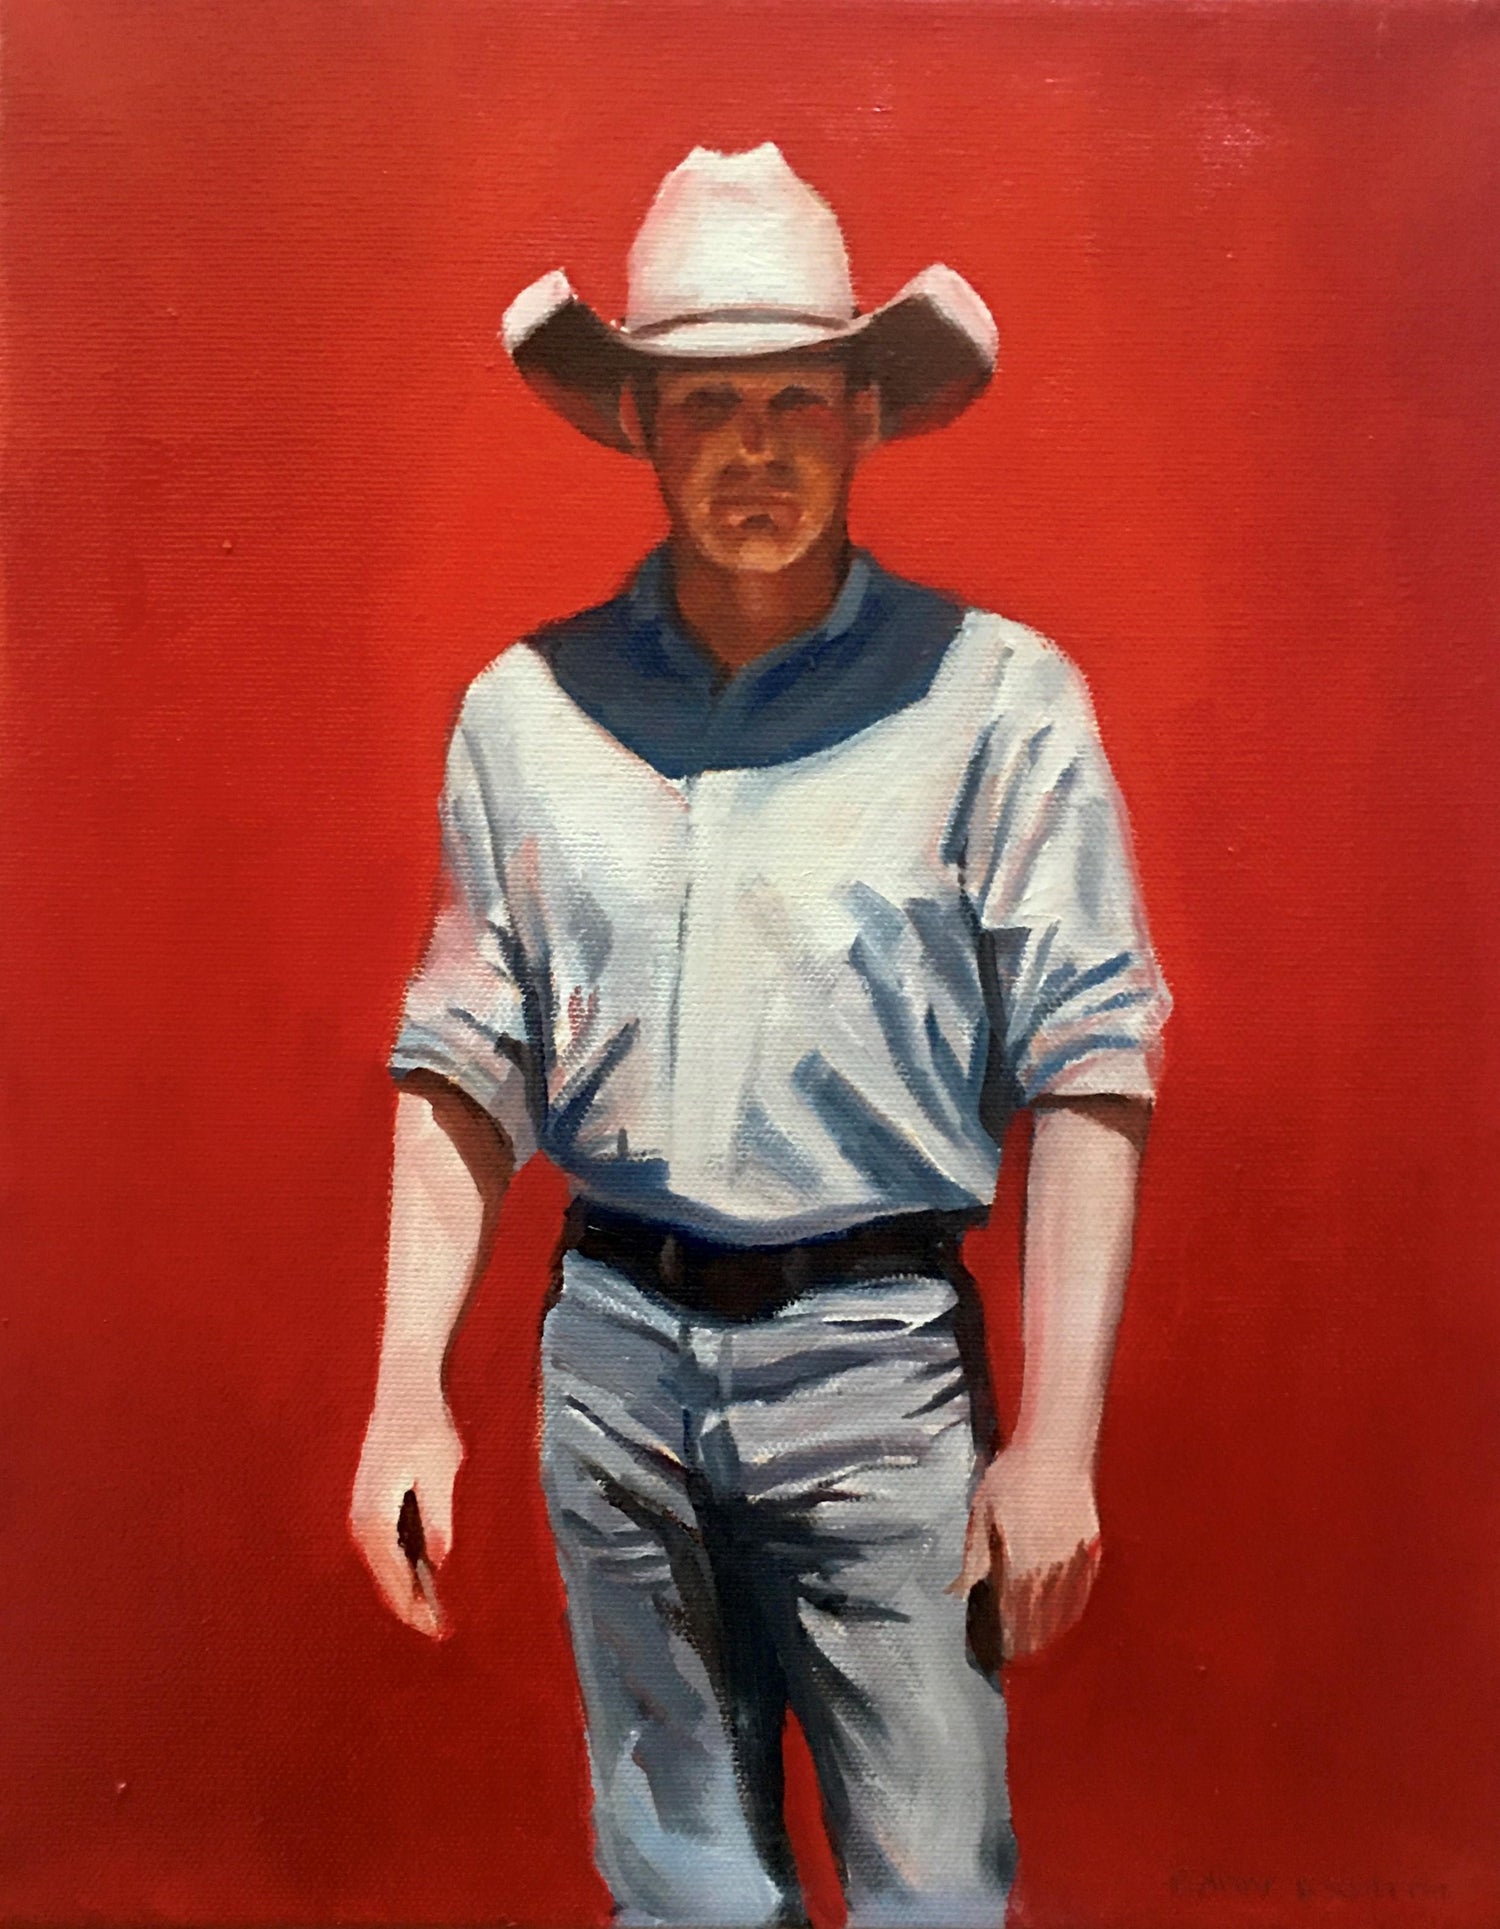 Gary Ernest Smith - "Solitary Man 2" For Sale at 1stDibs